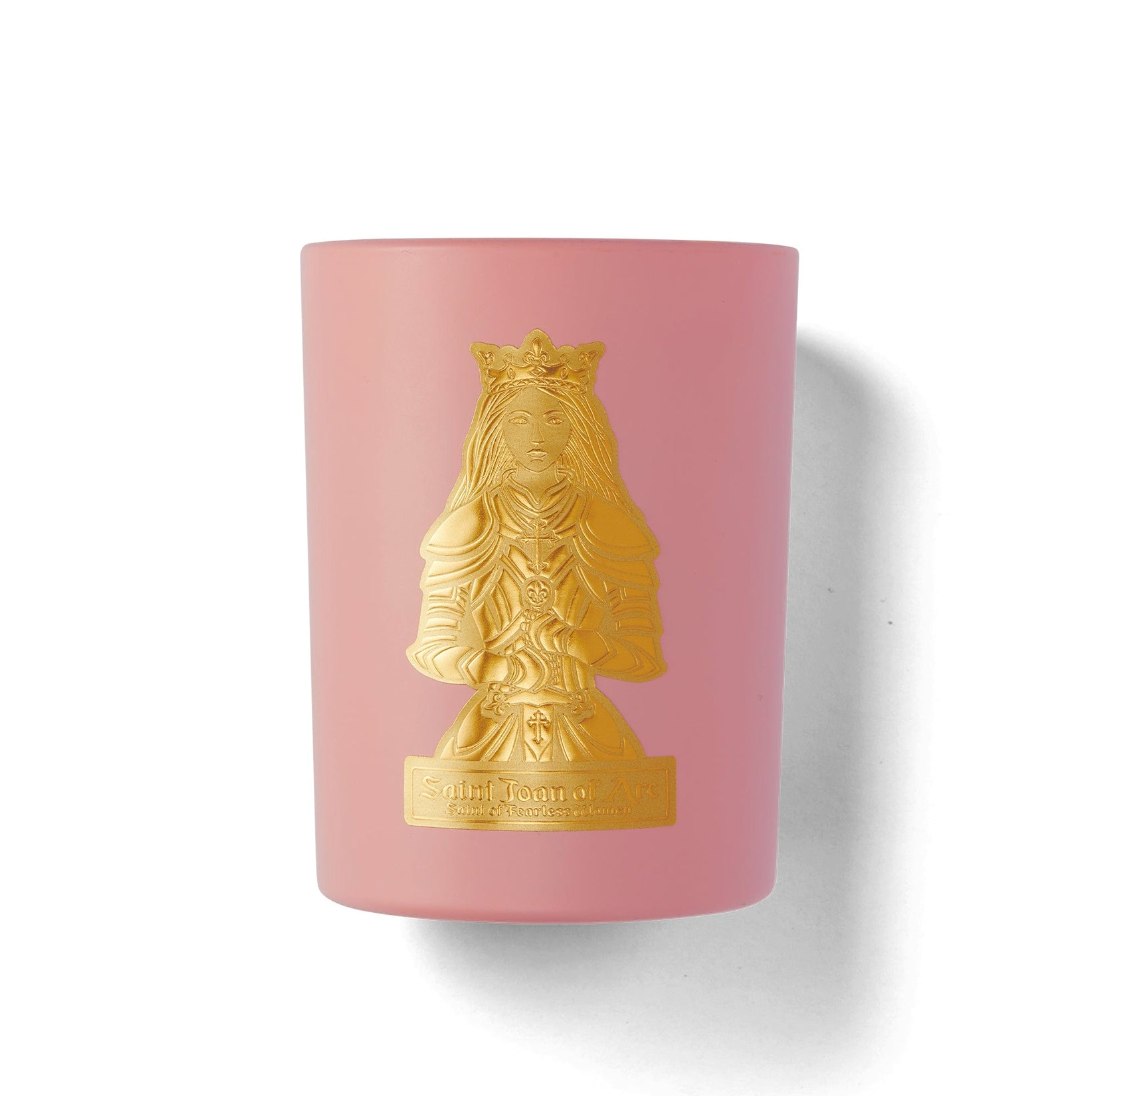 SPECIAL EDITION SAINT JOAN OF ARC CANDLE